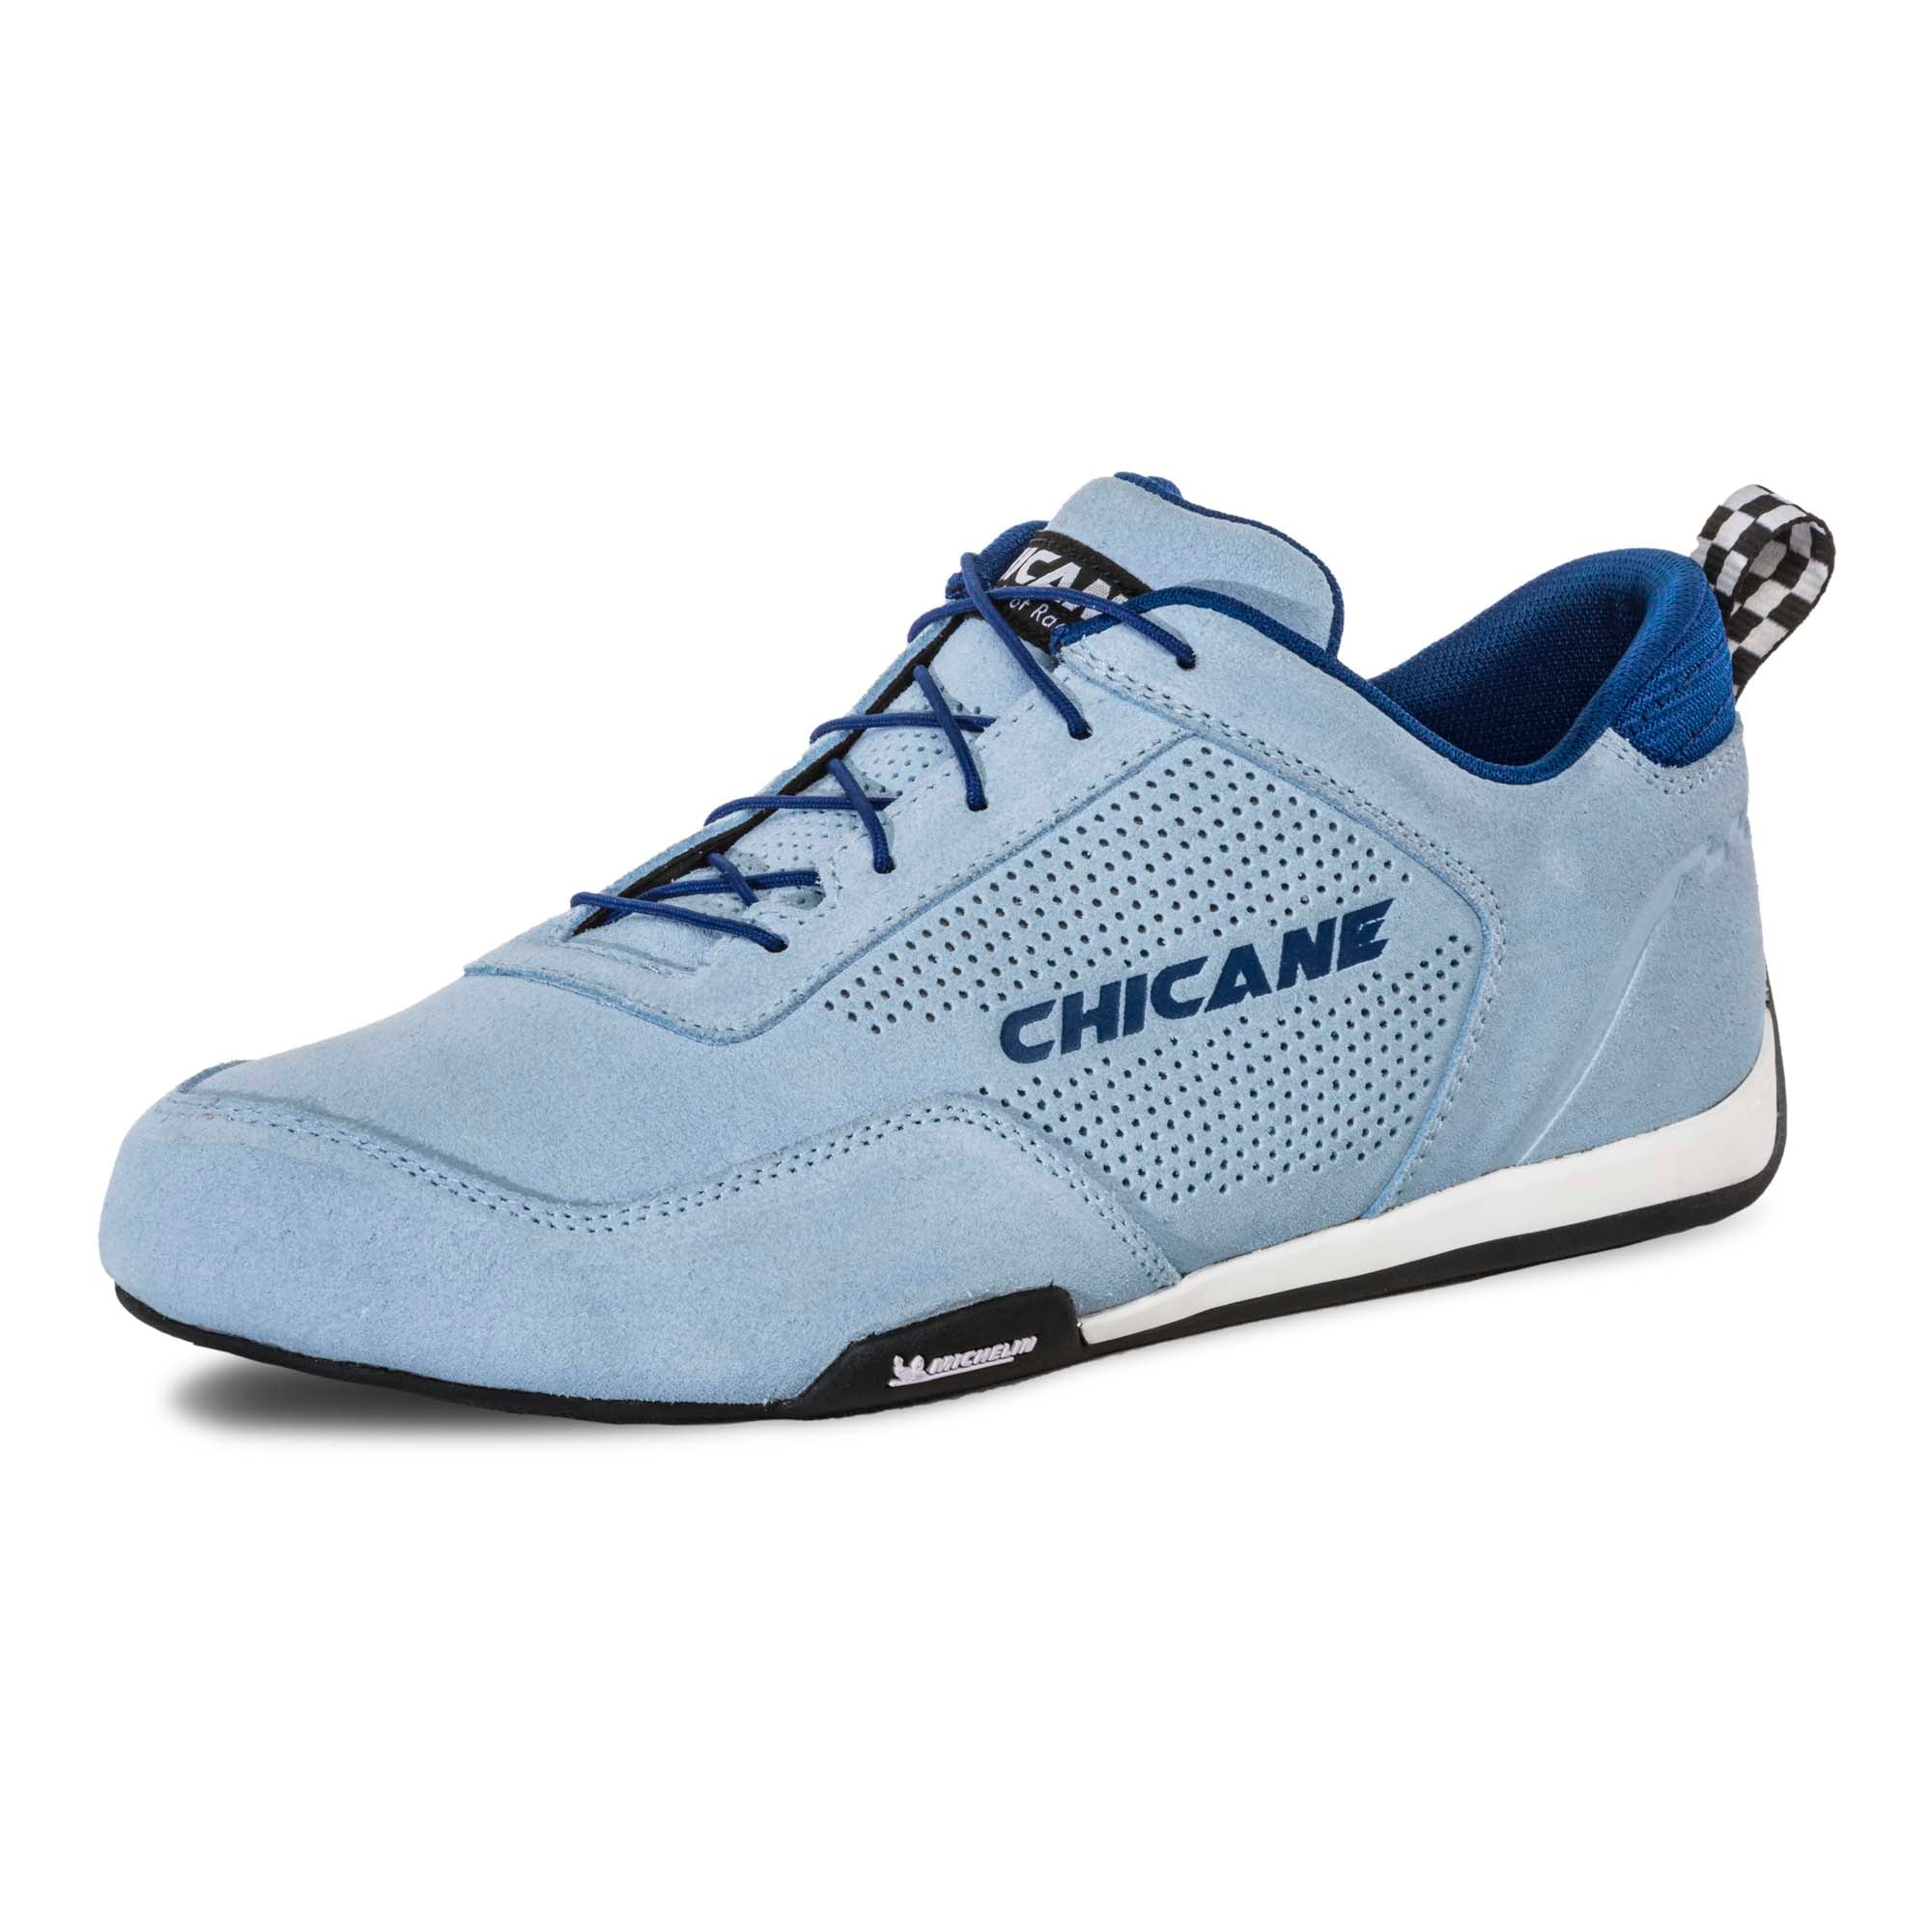 Chicane Speedster Women's Shoes